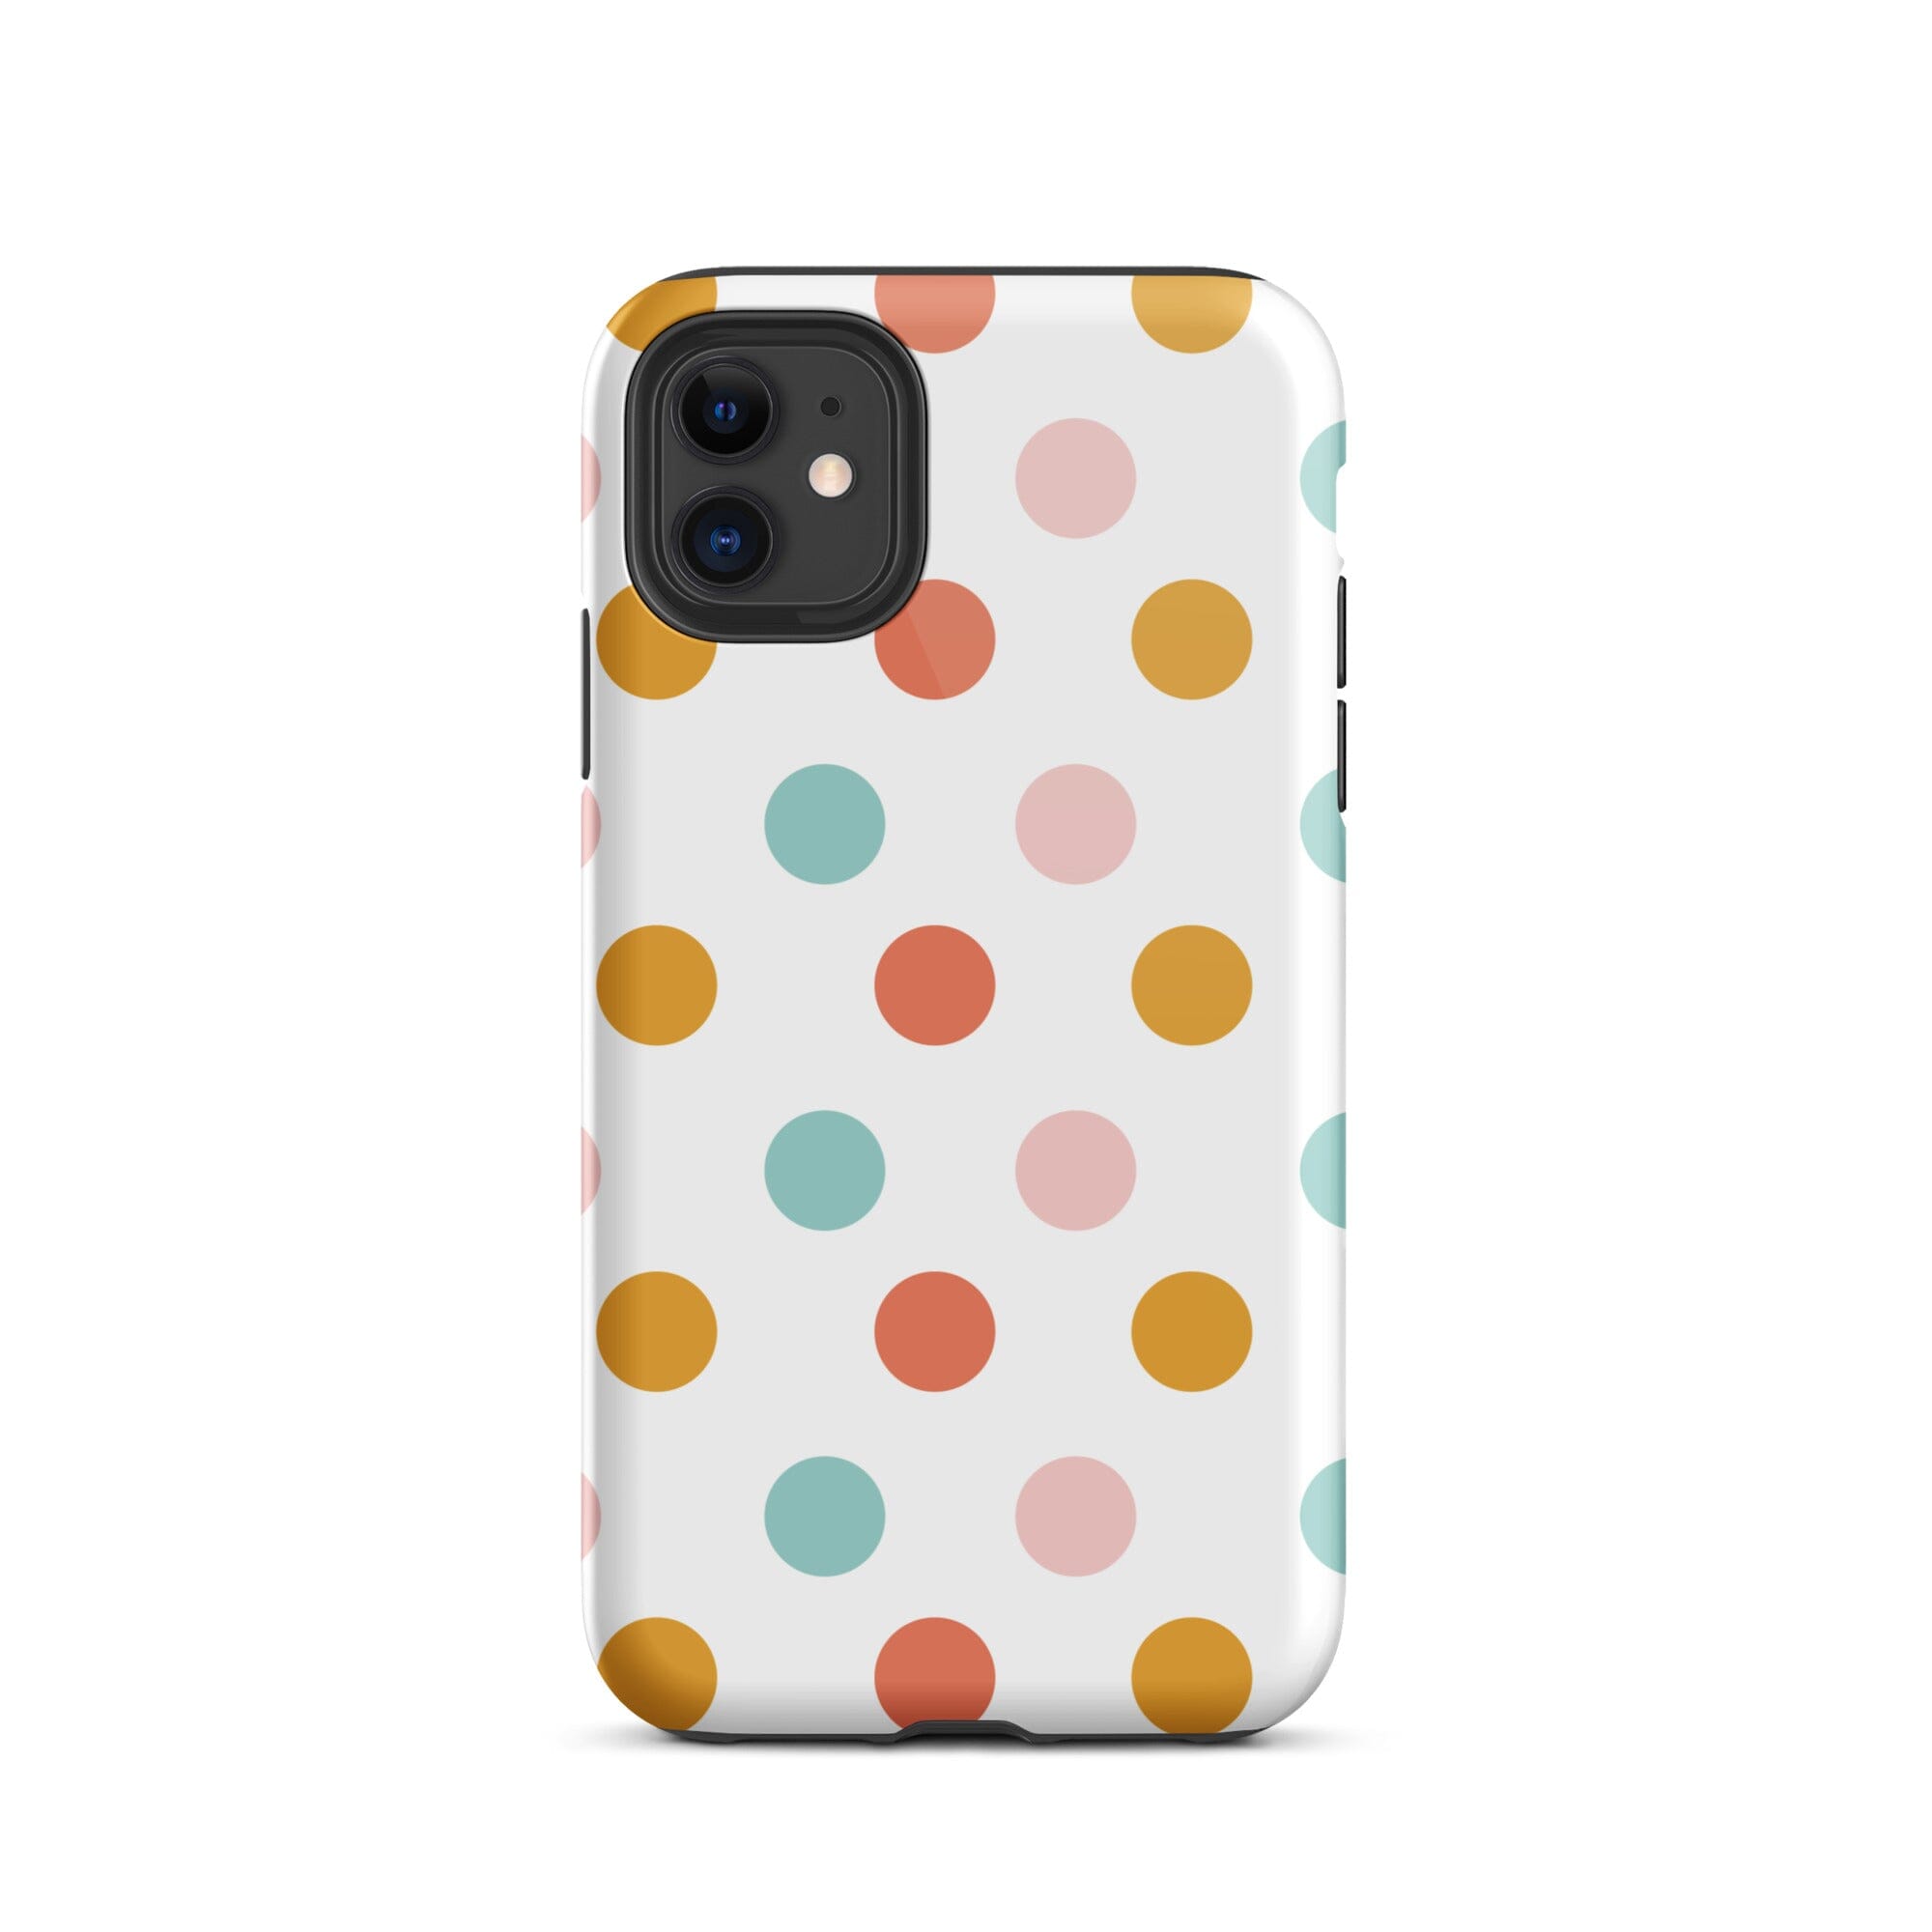 Polka Dots iPhone Case Knitted Belle Boutique iPhone 11 